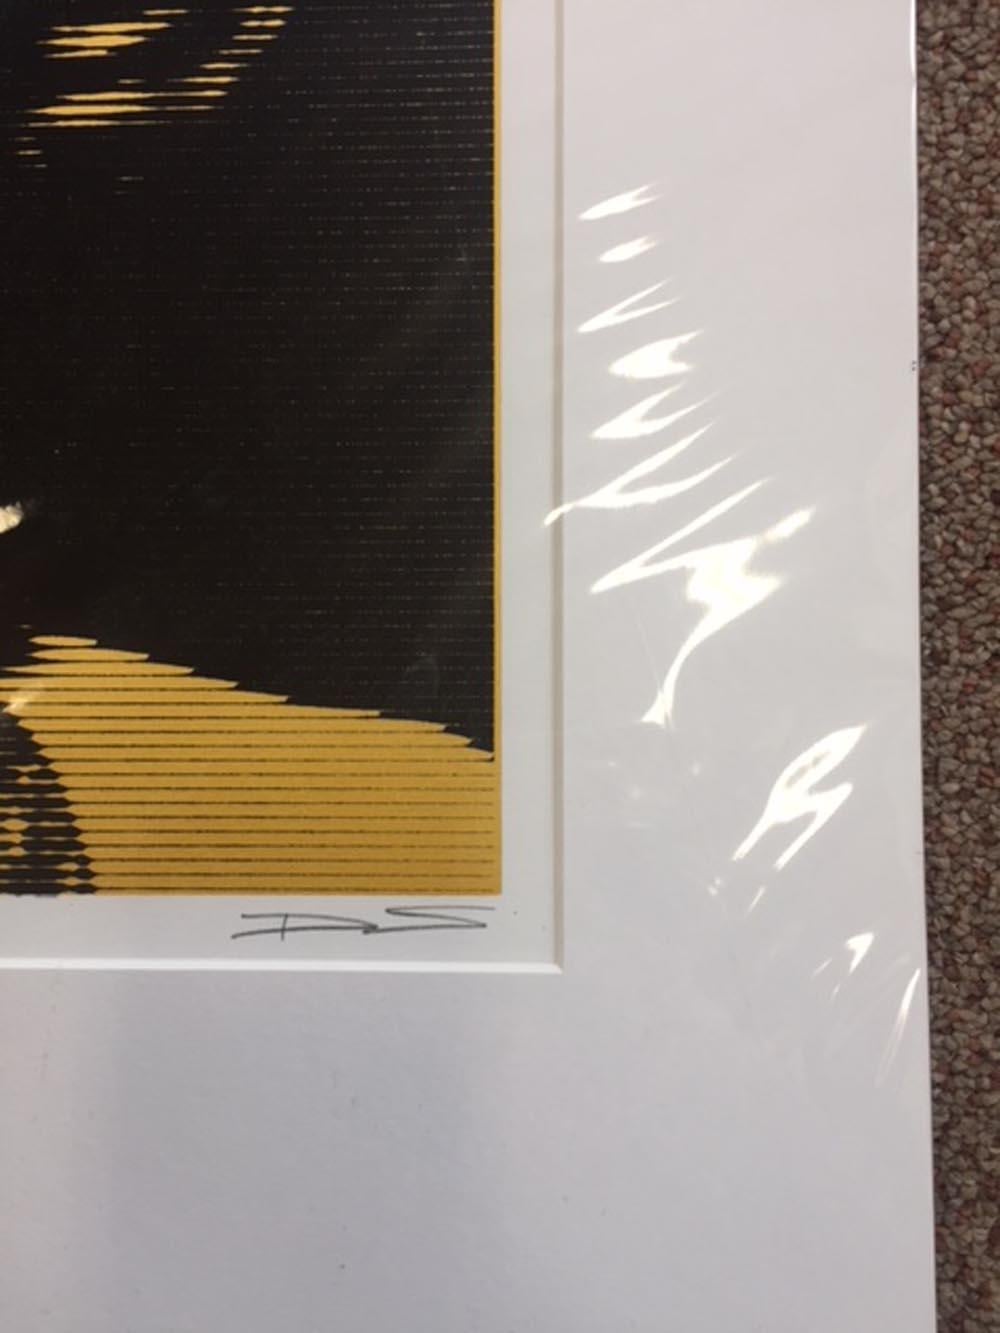 Gold Marylin Monroe, limited edition gold Screen print, David Studwell, Celebrit 3